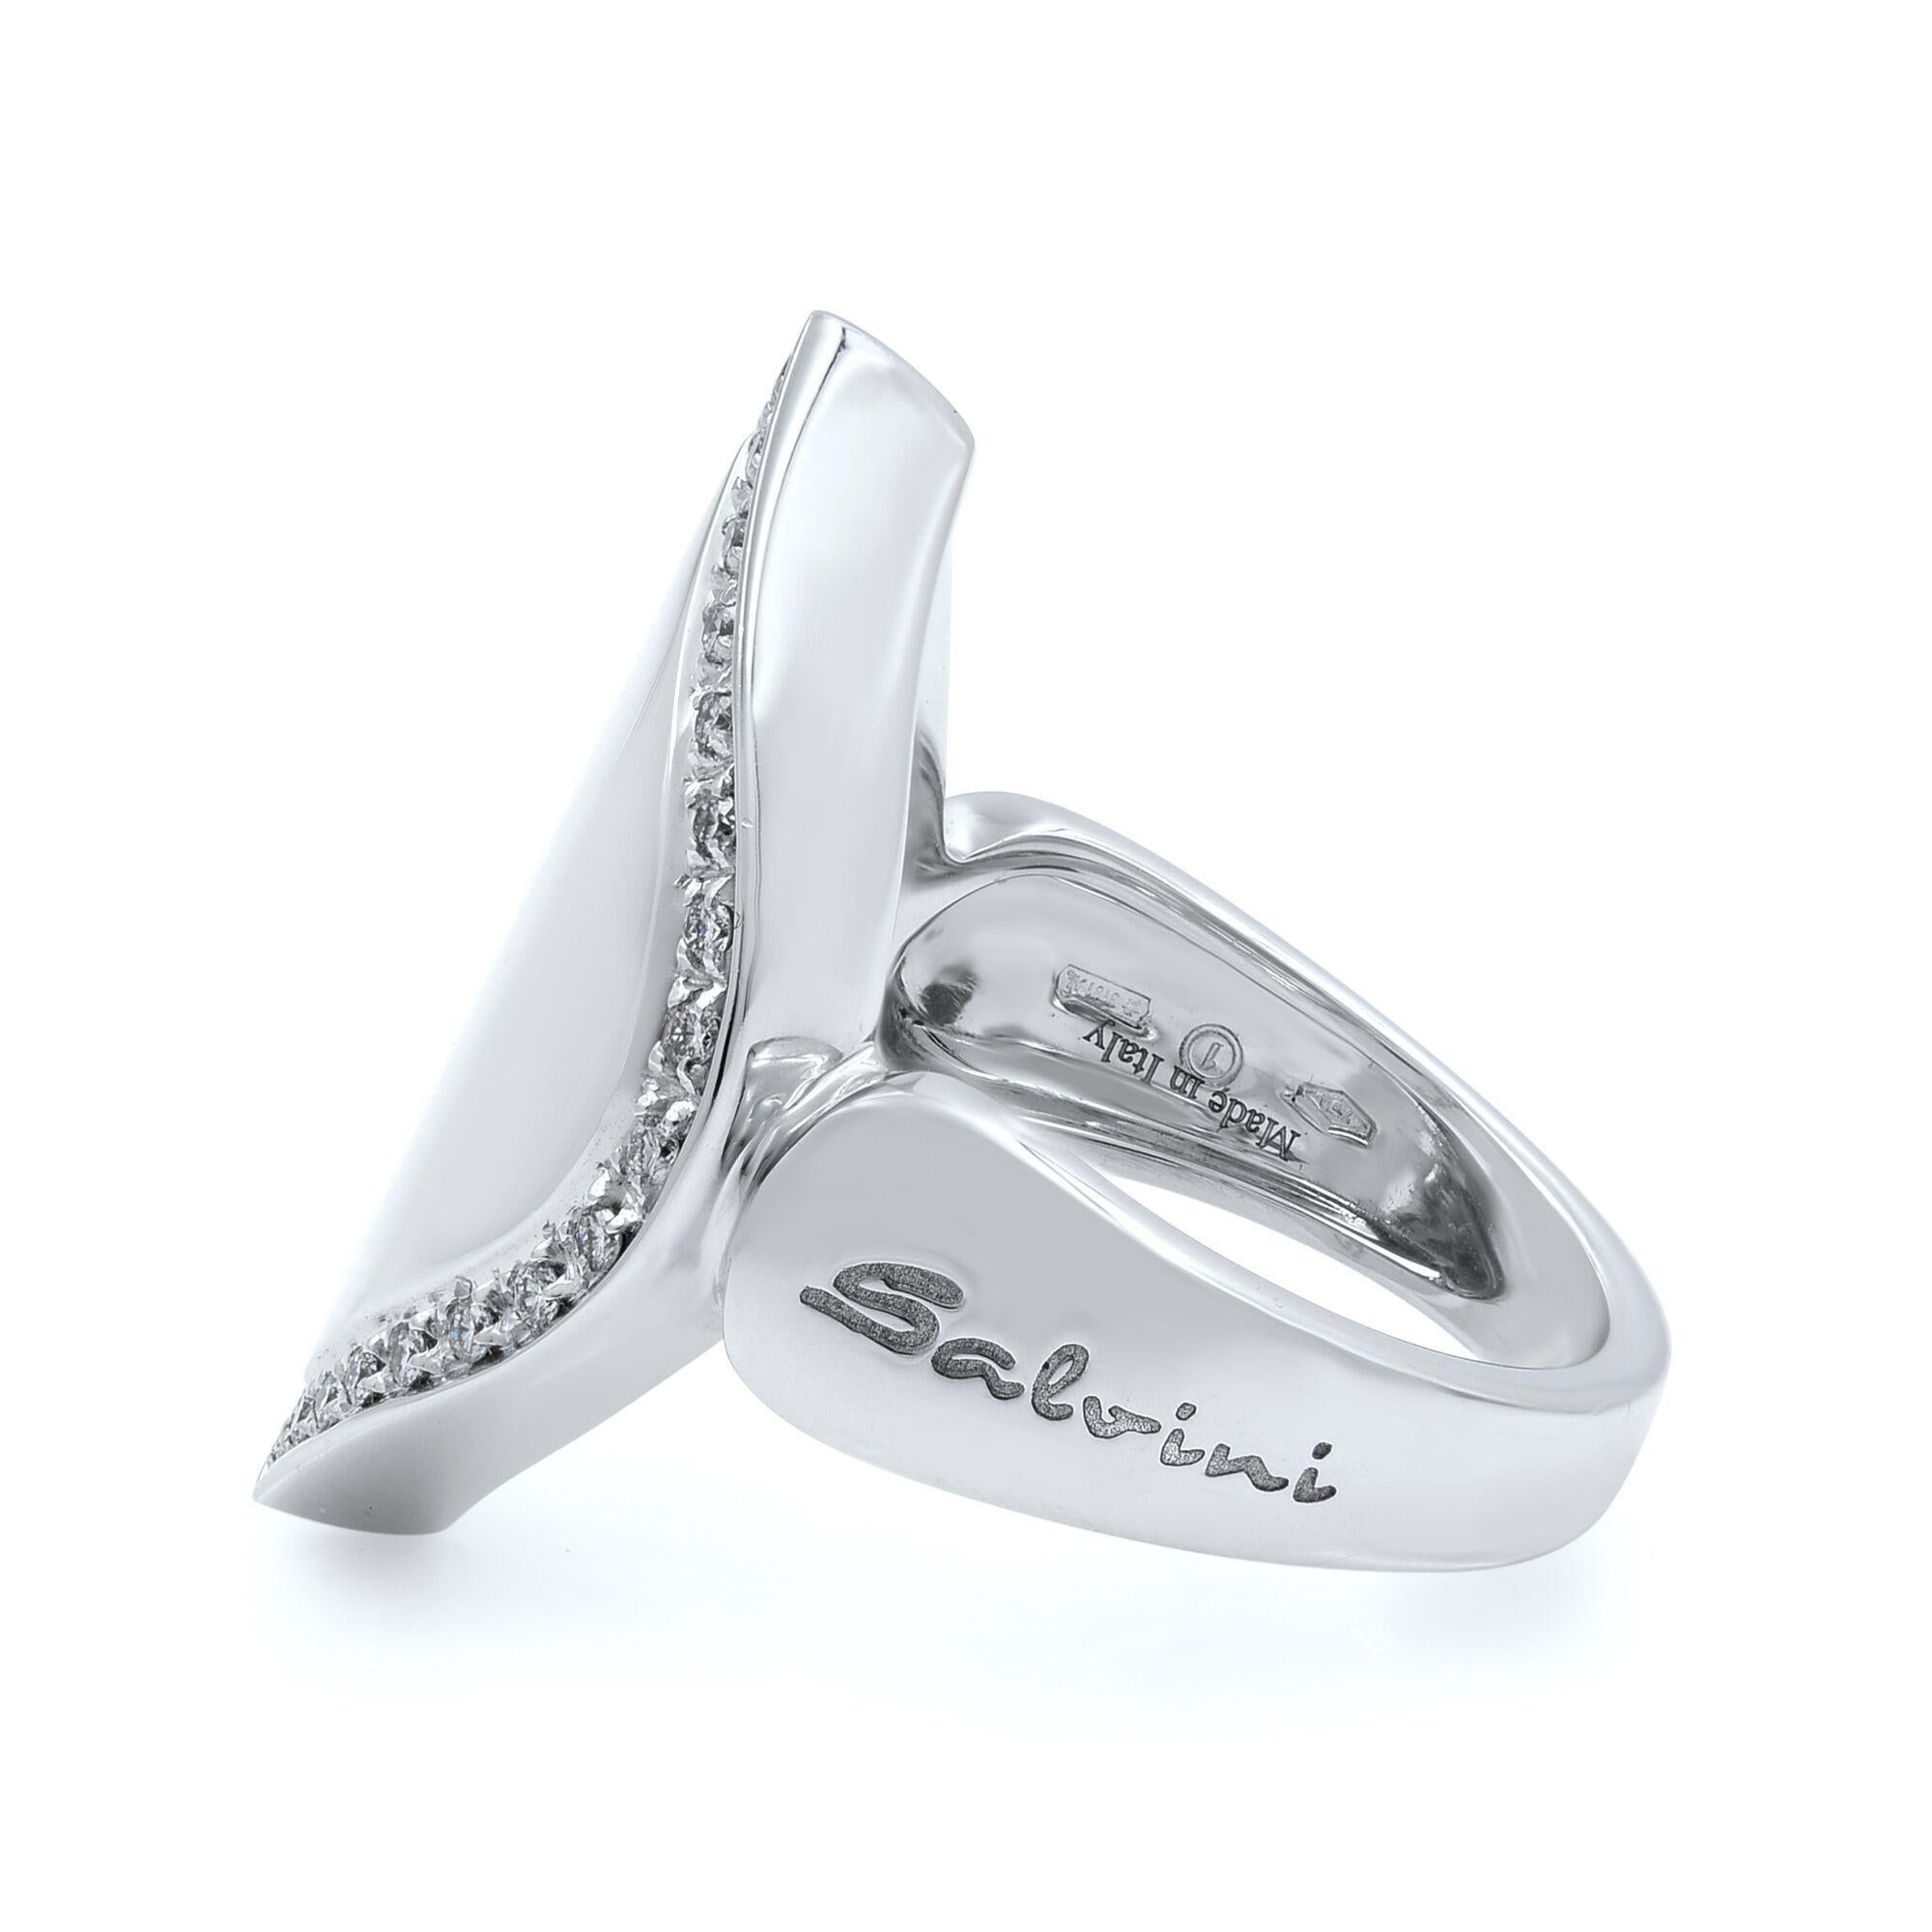 This contemporary design is made by Salvini. The ring is crafted in 18k white gold and encrusted with 32 sparkly diamonds with a total of 0.60 carats. Ring size is 8 and weighs 12.4 grams. Comes with a presentable gift box.